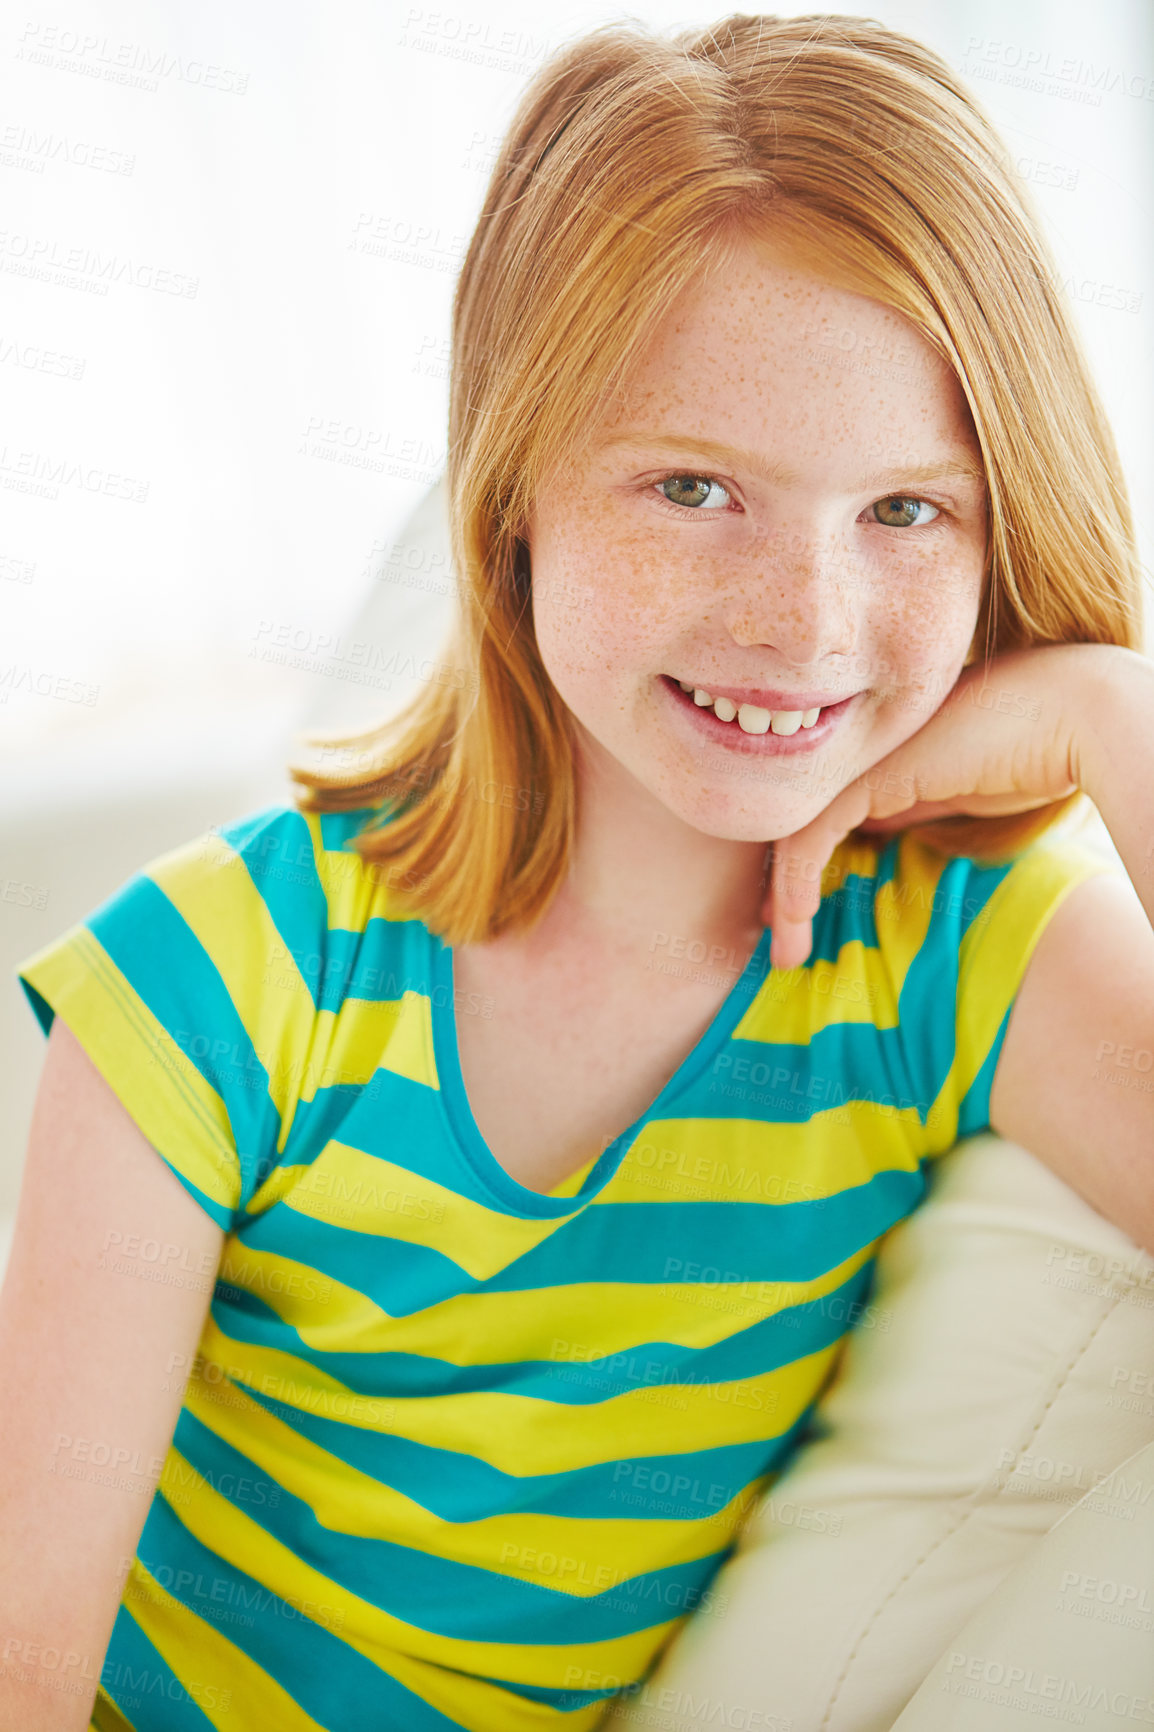 Buy stock photo Portrait of a little girl relaxing on the sofa at home